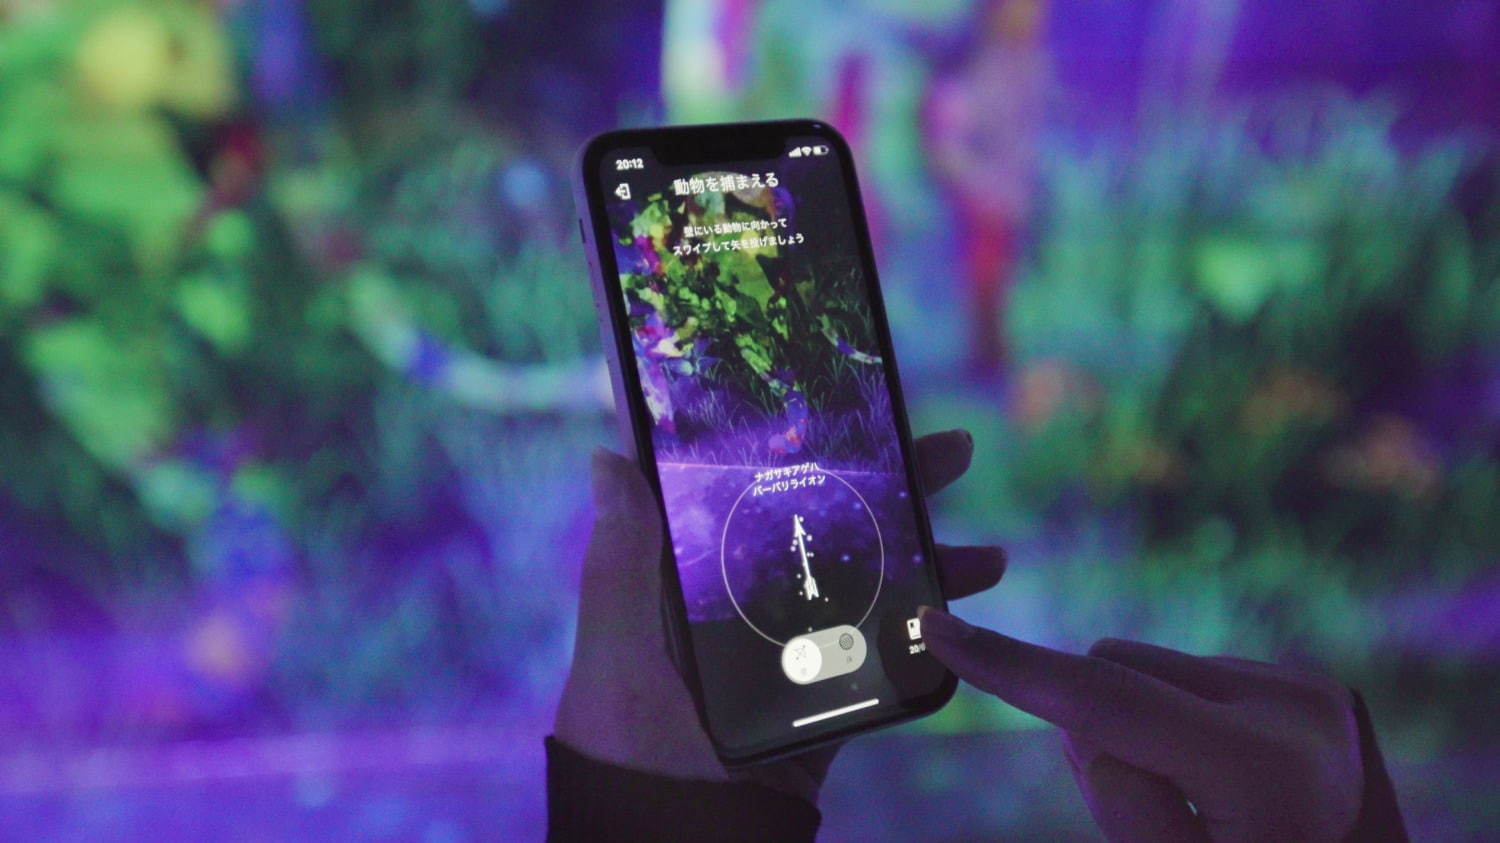 ߂܂ďW߂X / Catching and Collecting Forest teamLab, 2020, Interactive Digital installation, Endless, Sound: Hideaki Takahashi